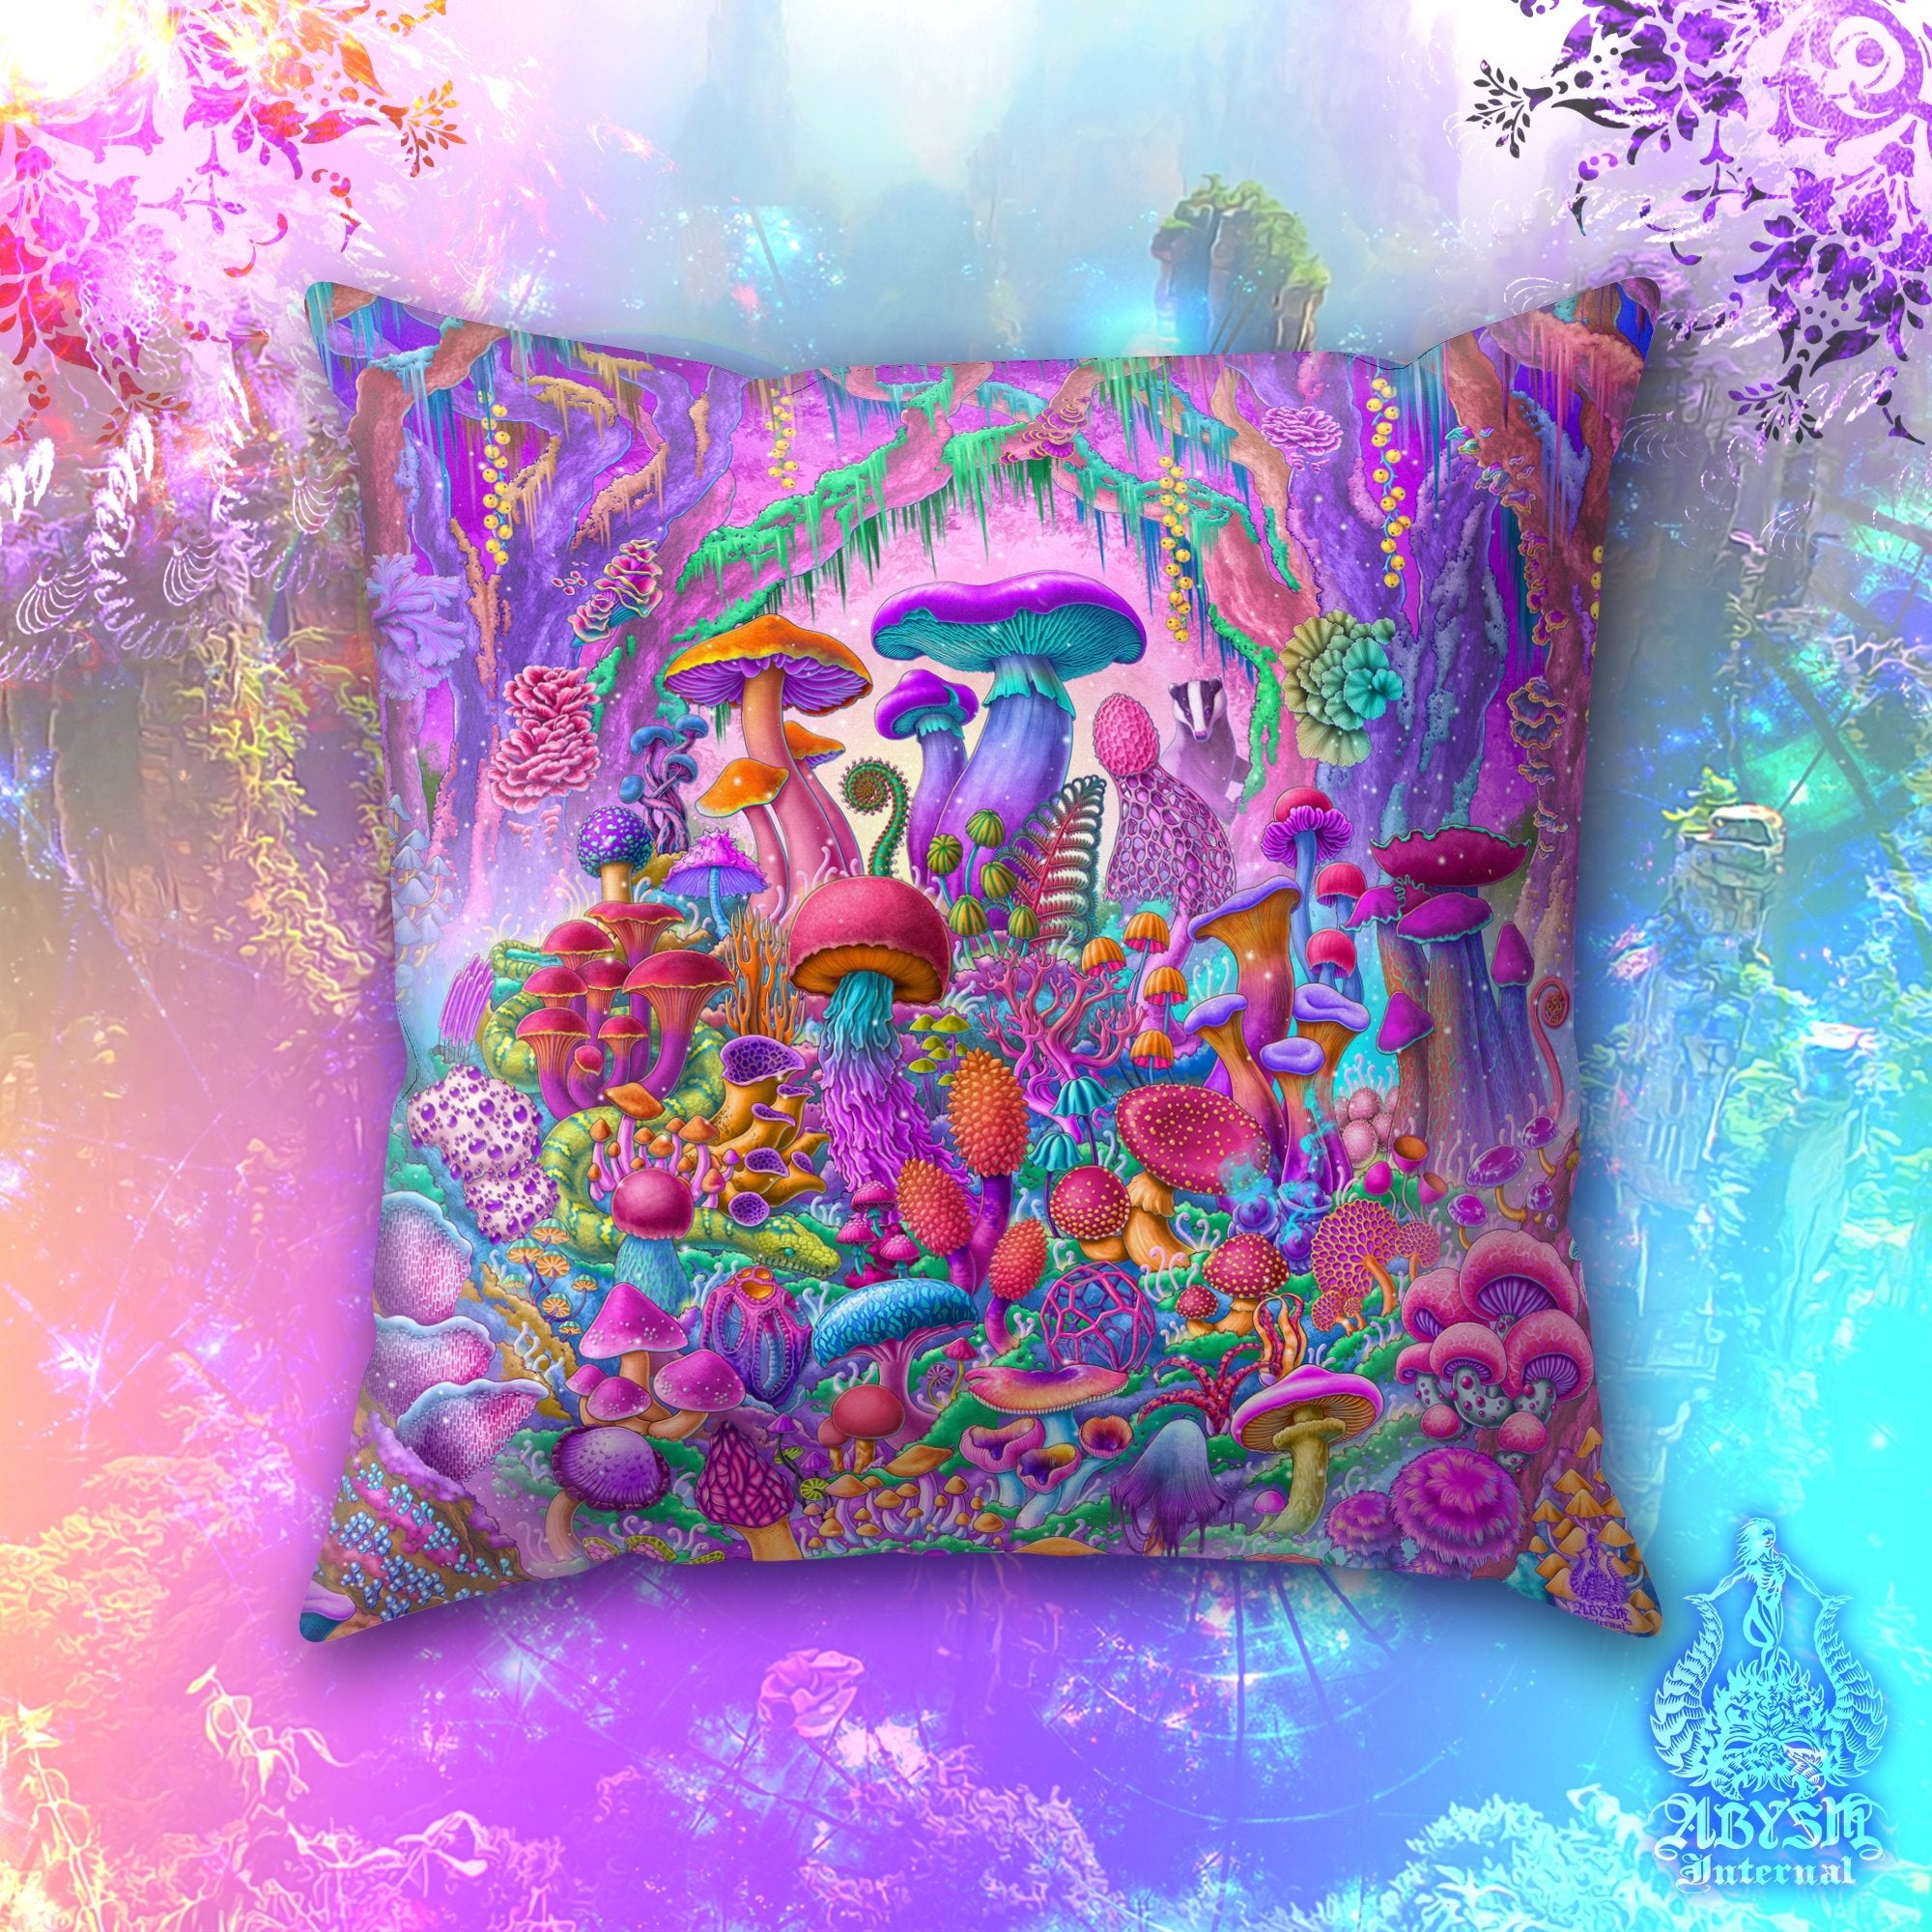 Mushrooms Throw Pillow, Aesthetic Decorative Accent Cushion, Pastel Girl's Room Decor, Psychedelic Magic Shrooms Art Print - Abysm Internal